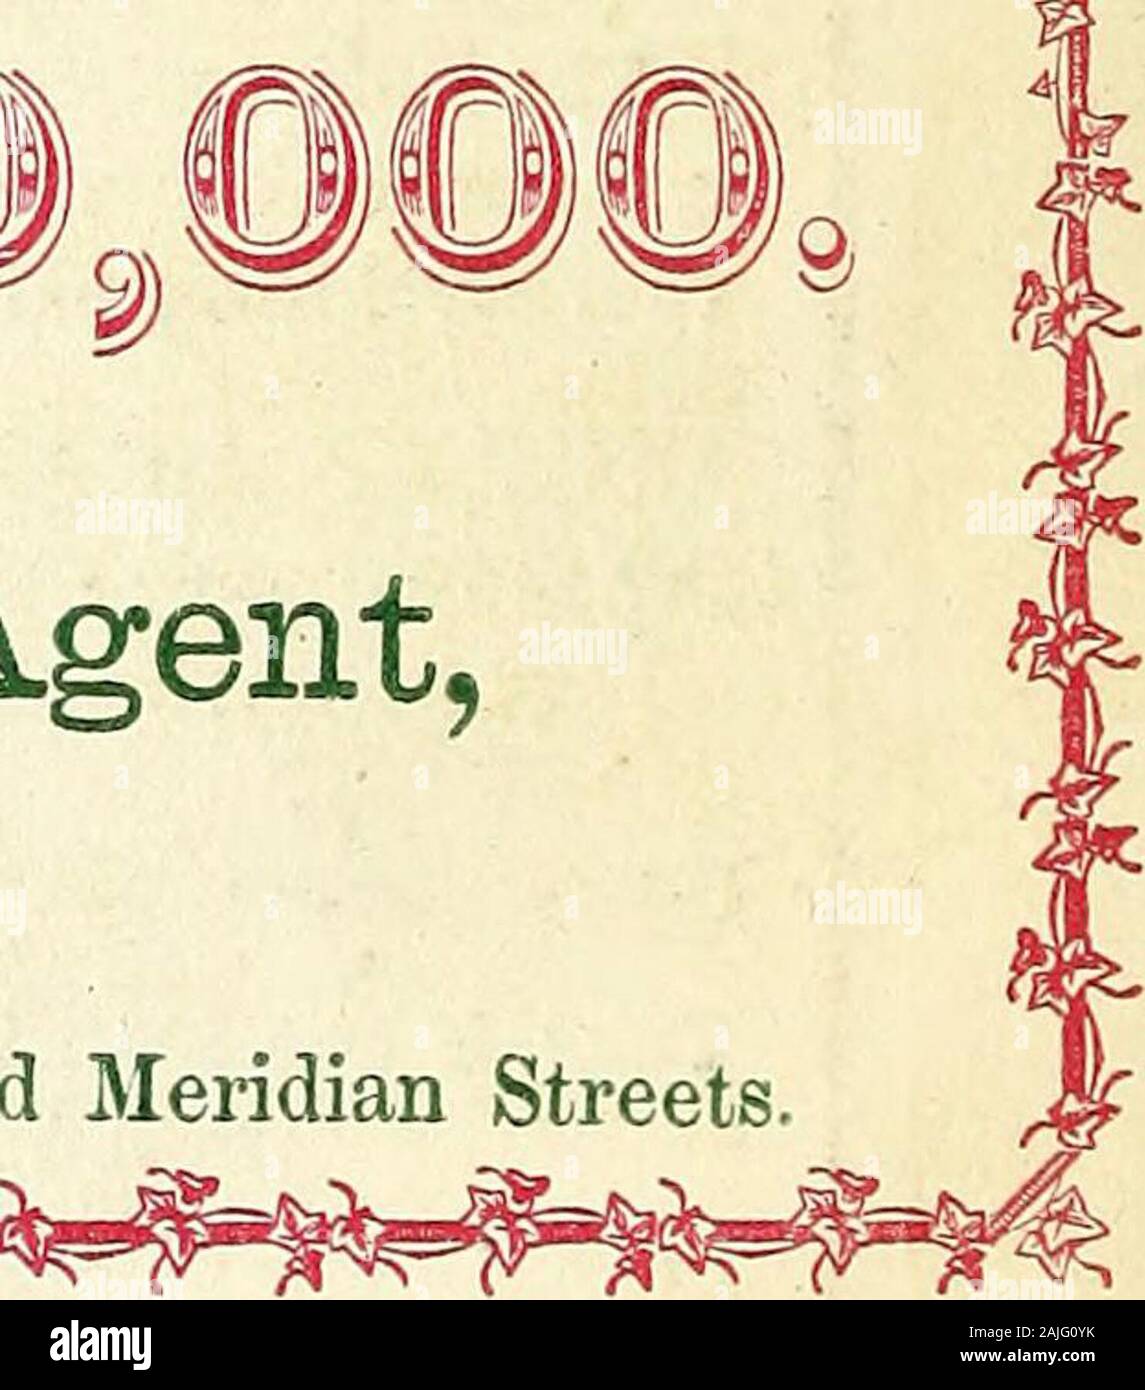 Logan's Indianapolis directory . W. W. BYING-TON, General Agent, S. W. Cor. Washington and Meridian Streets.. ANNUAL PREMIUM FOR AN INSURANCE ON $1,000 Hfoij t$tm of Life, with Ufyofits. Annual Prem. AGE. Annual Prem AGE. during Life. during Life. during Life. 18 $16.90 31 $24.30 44 $36.30 19 17.30 32 25.00 45 37.30 20 17.70 33 25.70 46 38.70 21 18.20 34 26.40 47 40.10 22 18.80 35 27.50 48 41.70 23 19.30 36 28.10 49 44.90 24 19.80 37 29.00 50 47.70 25 20.40 38 30.50 51 49.90 26 21.10 39 31.10 52 52.20 27 21.70 40 32.00 53 54.70 28 22.40 41 33.10 54 57.30 29 23.10 42 34.00 55 60.00 30 23.60 4 Stock Photo